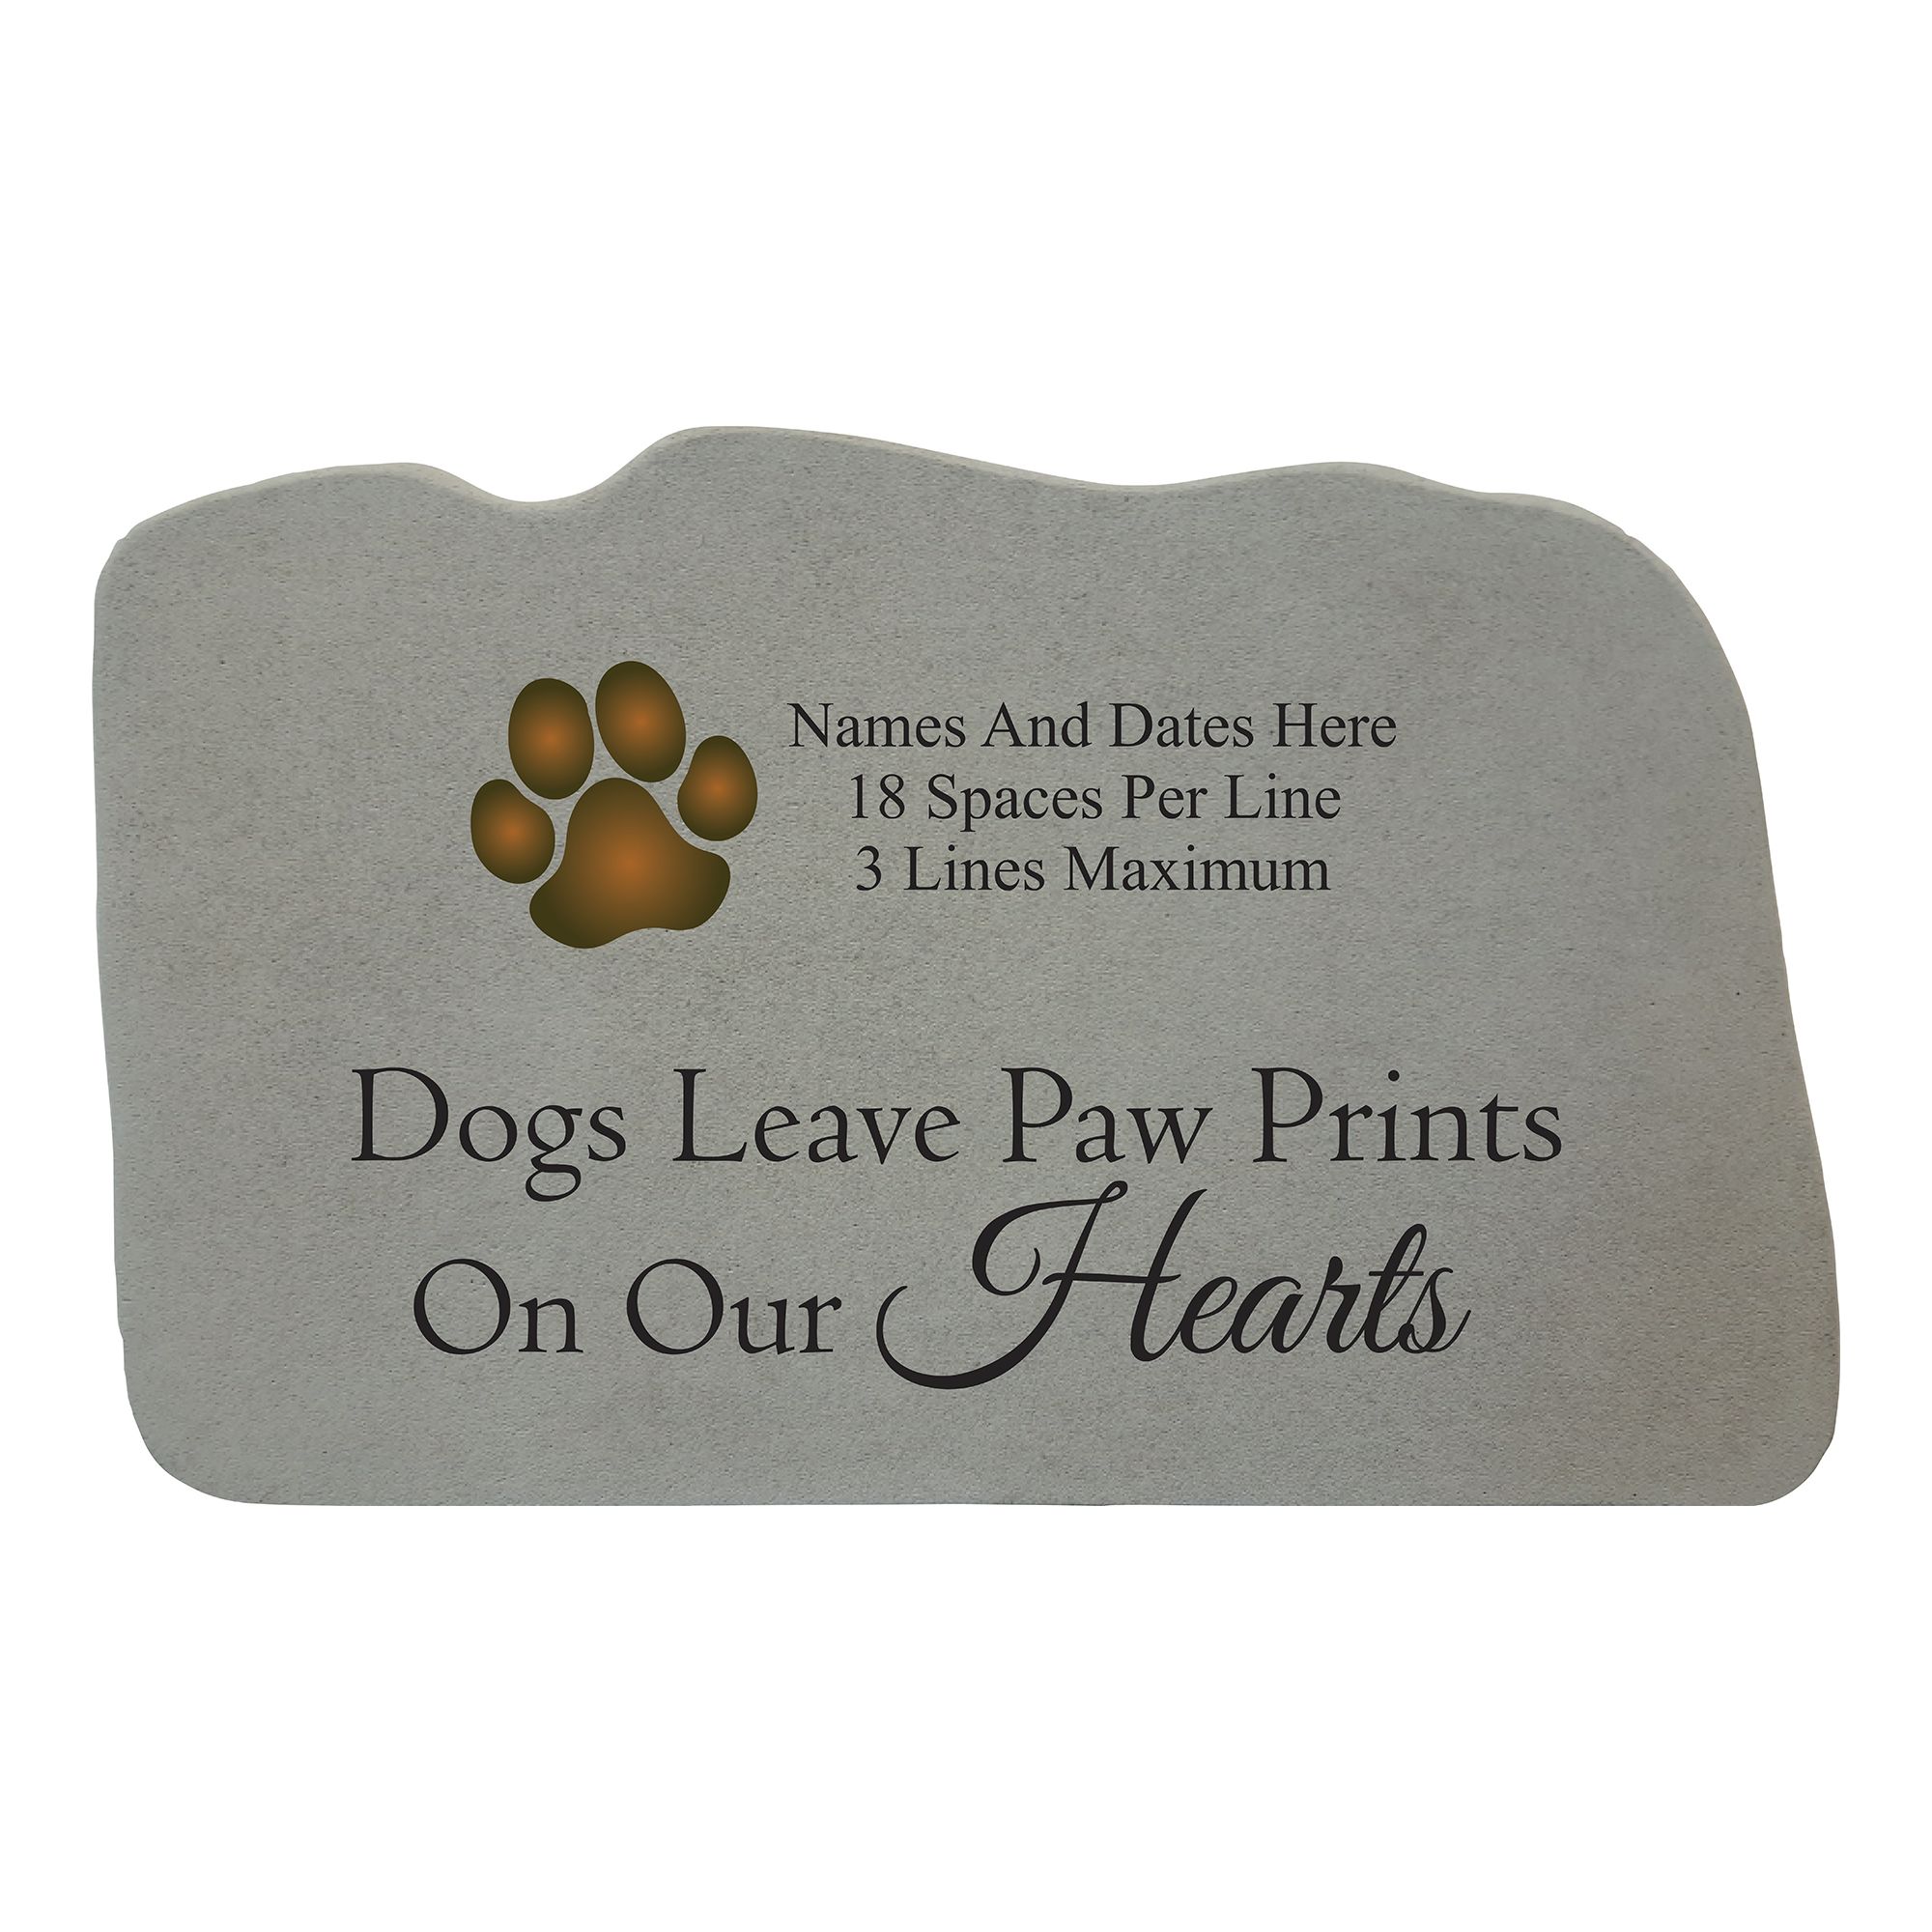 name and dates Personalized with paw prints